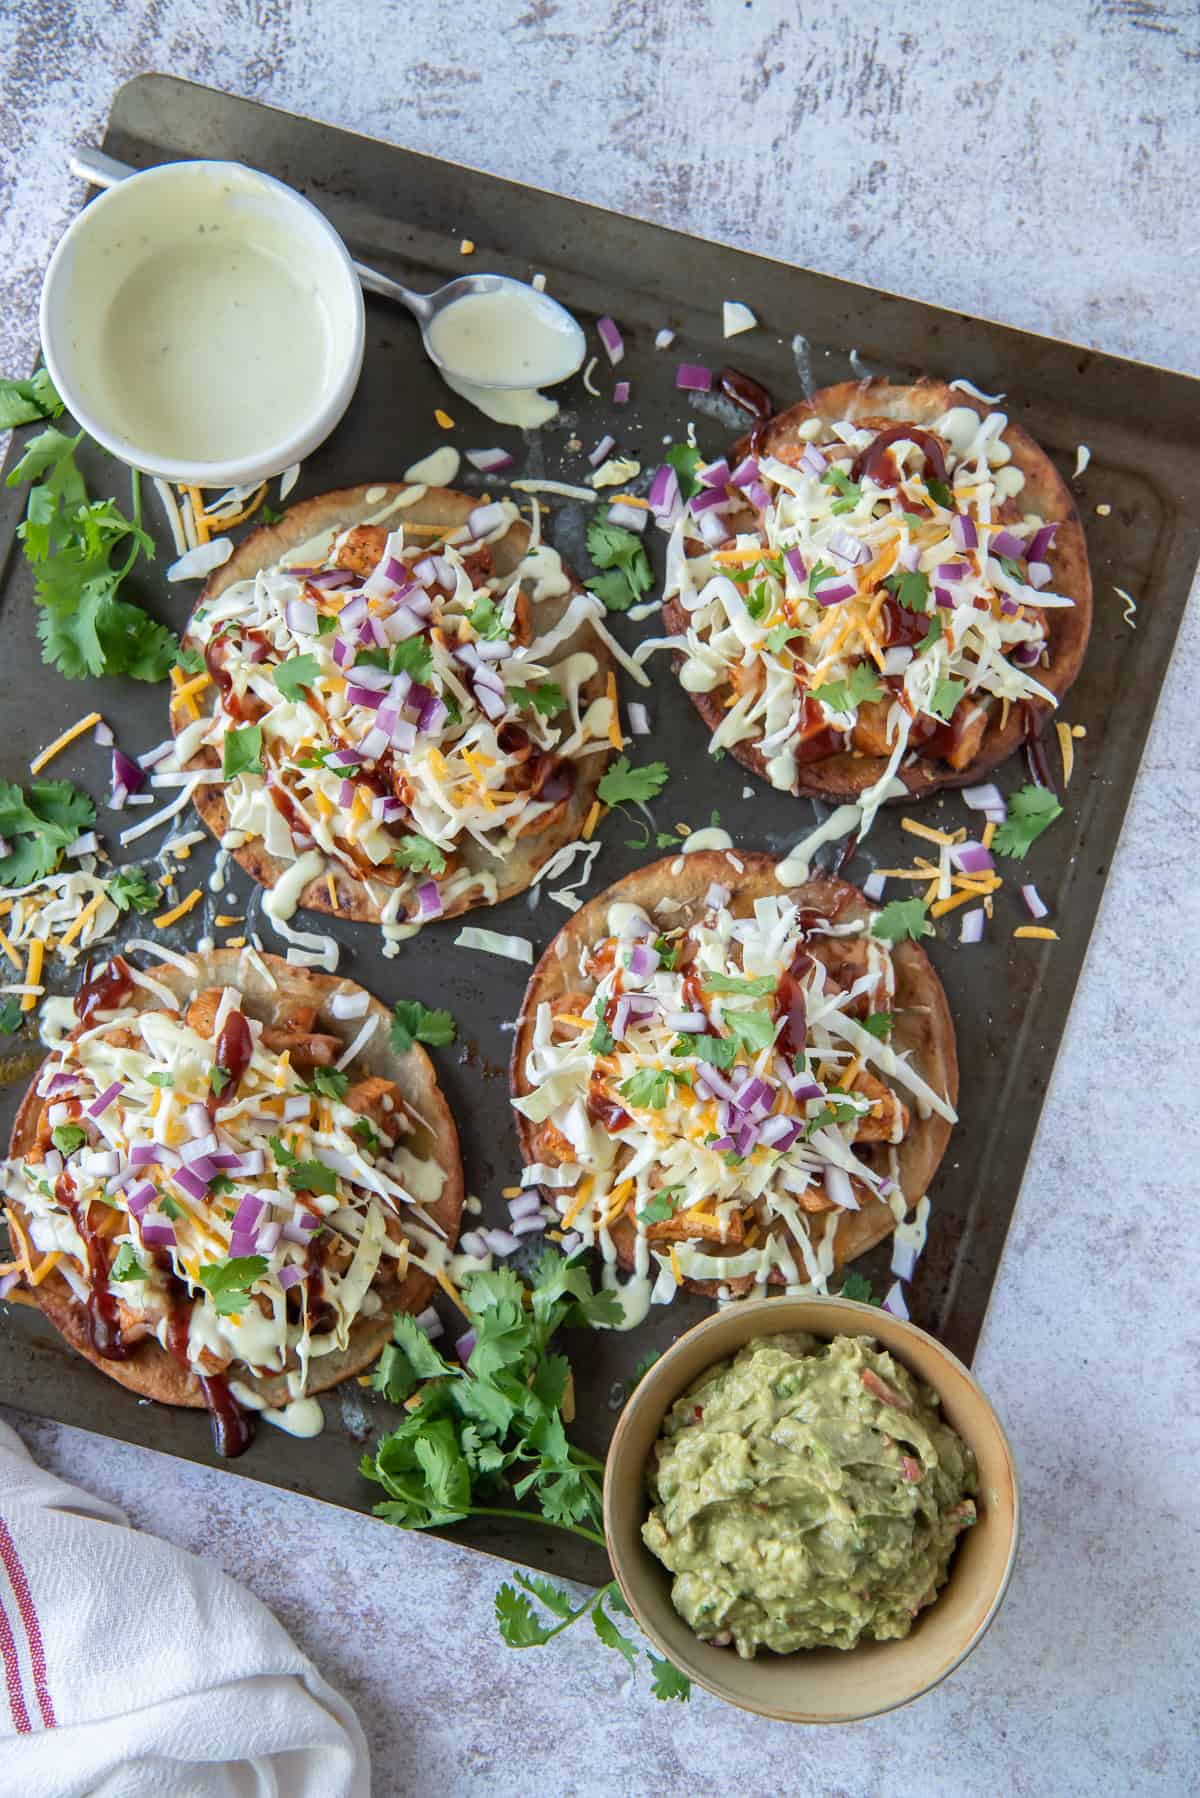 Tostadas on a baking sheet with a bowl of guacamole and salad dressing.